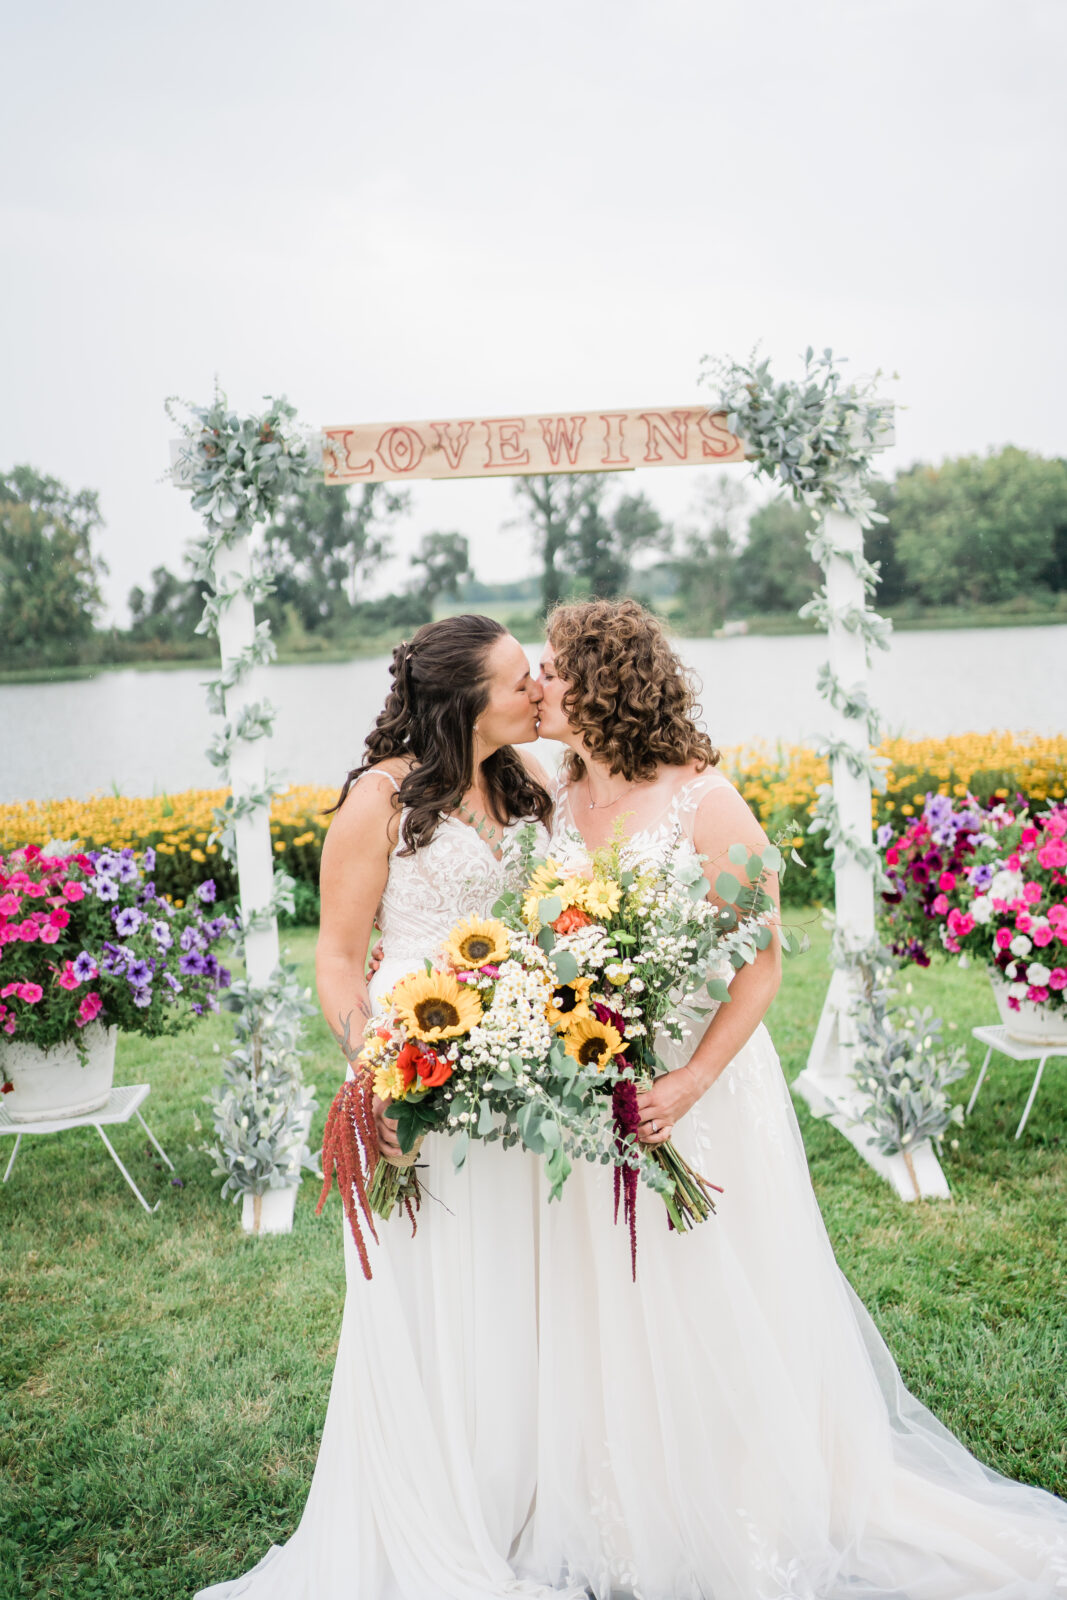 brides kissing at alter after outdoor wedding ceremony